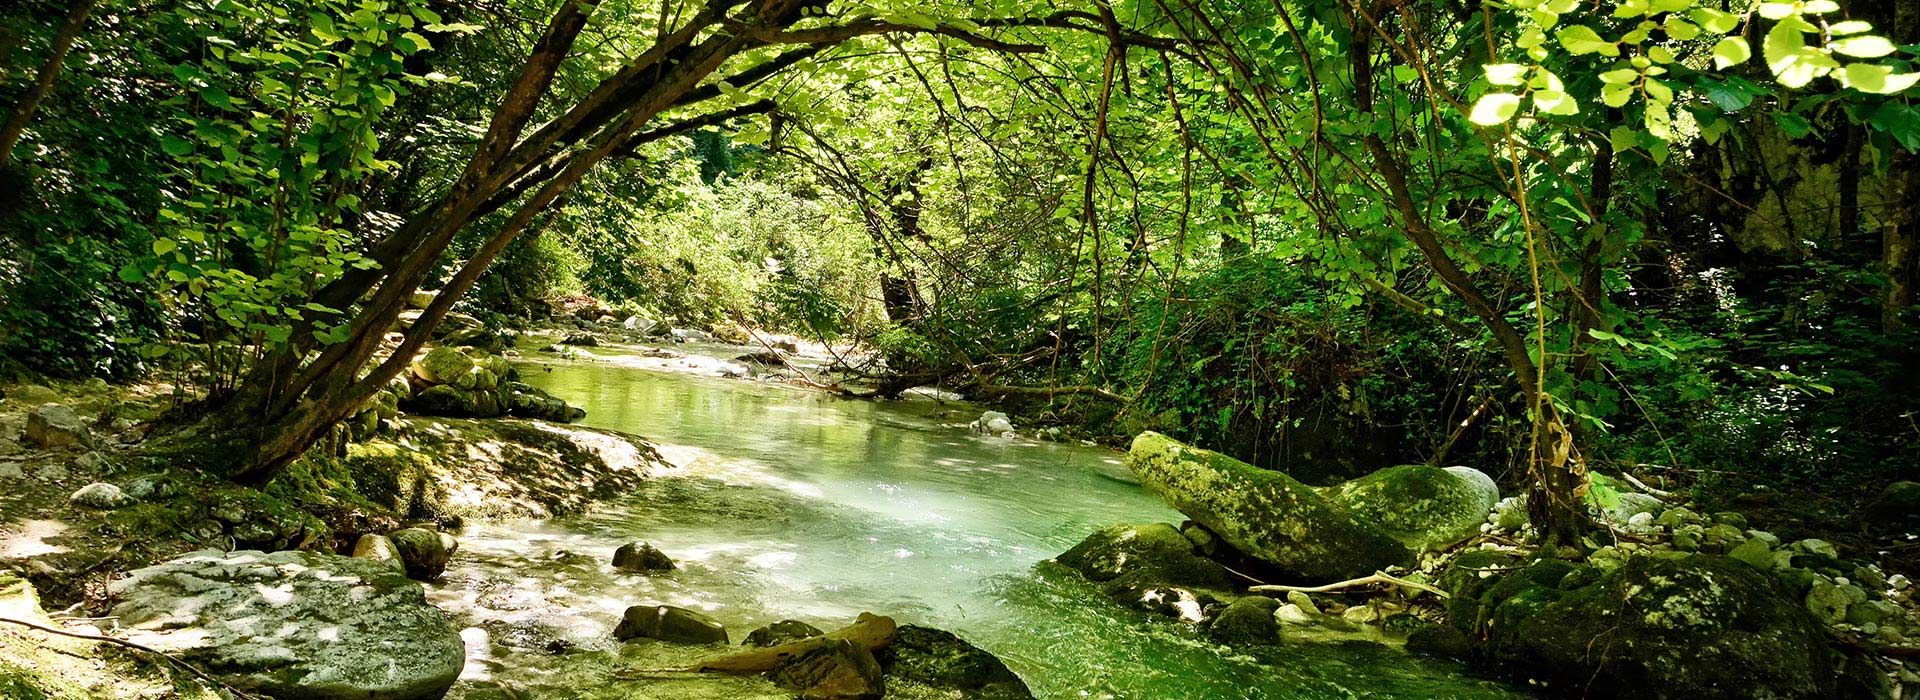 The waters of Abruzzo